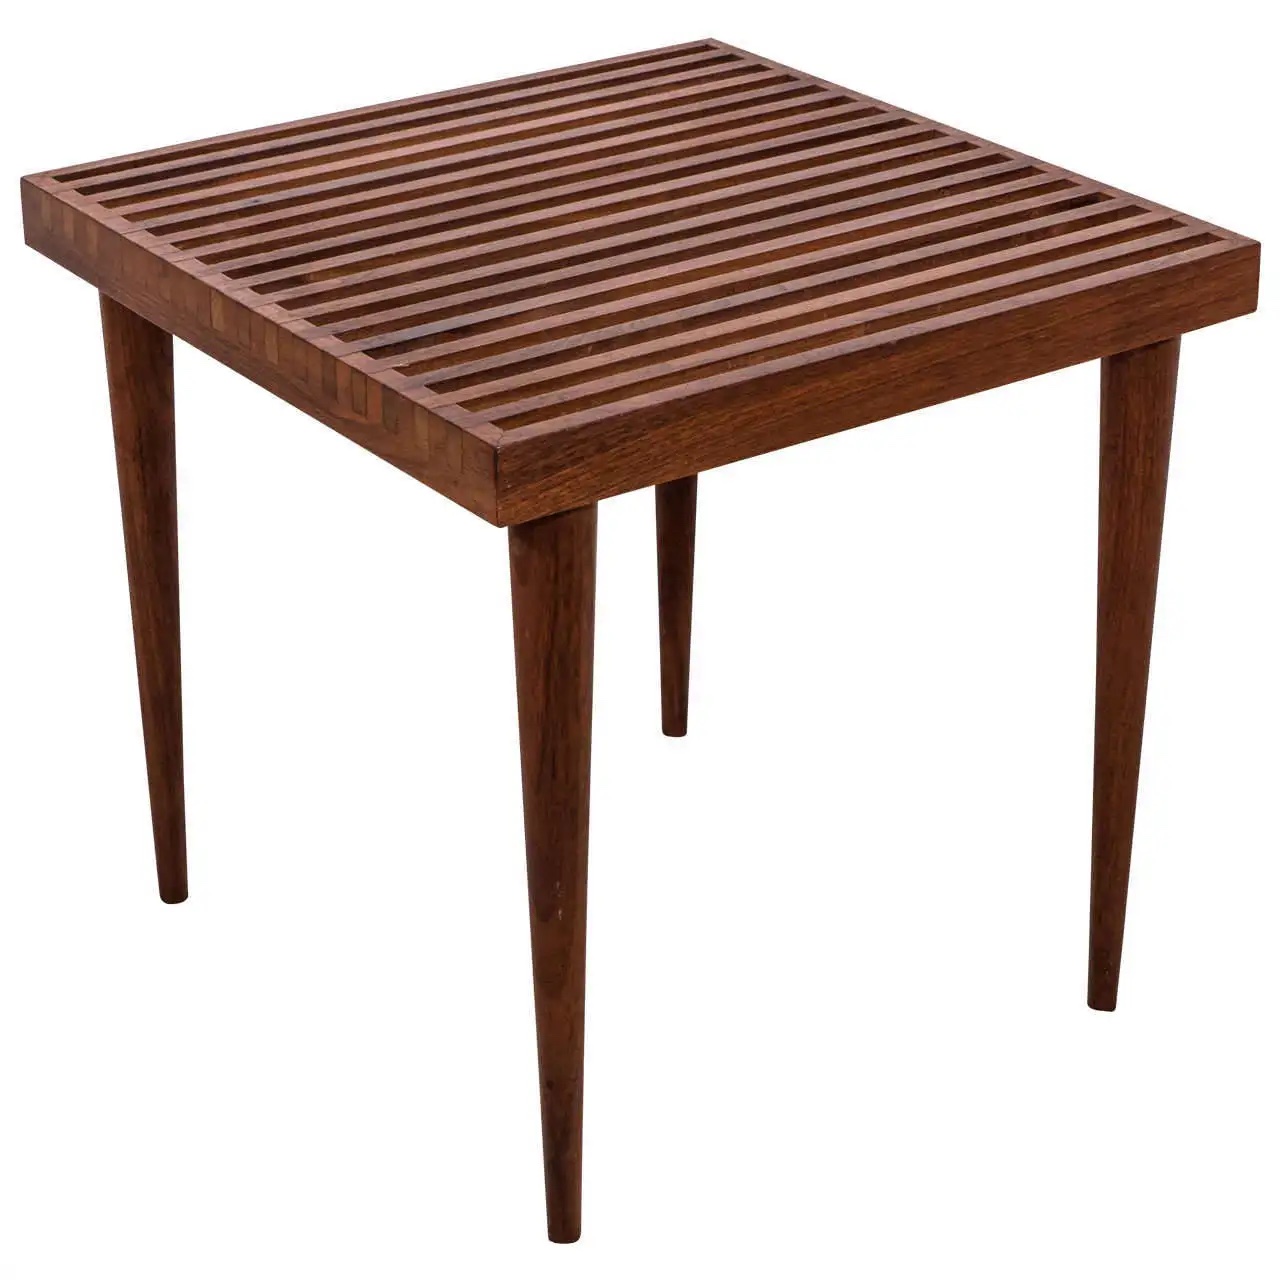 A midcentury-modern slatted-wood side or end table